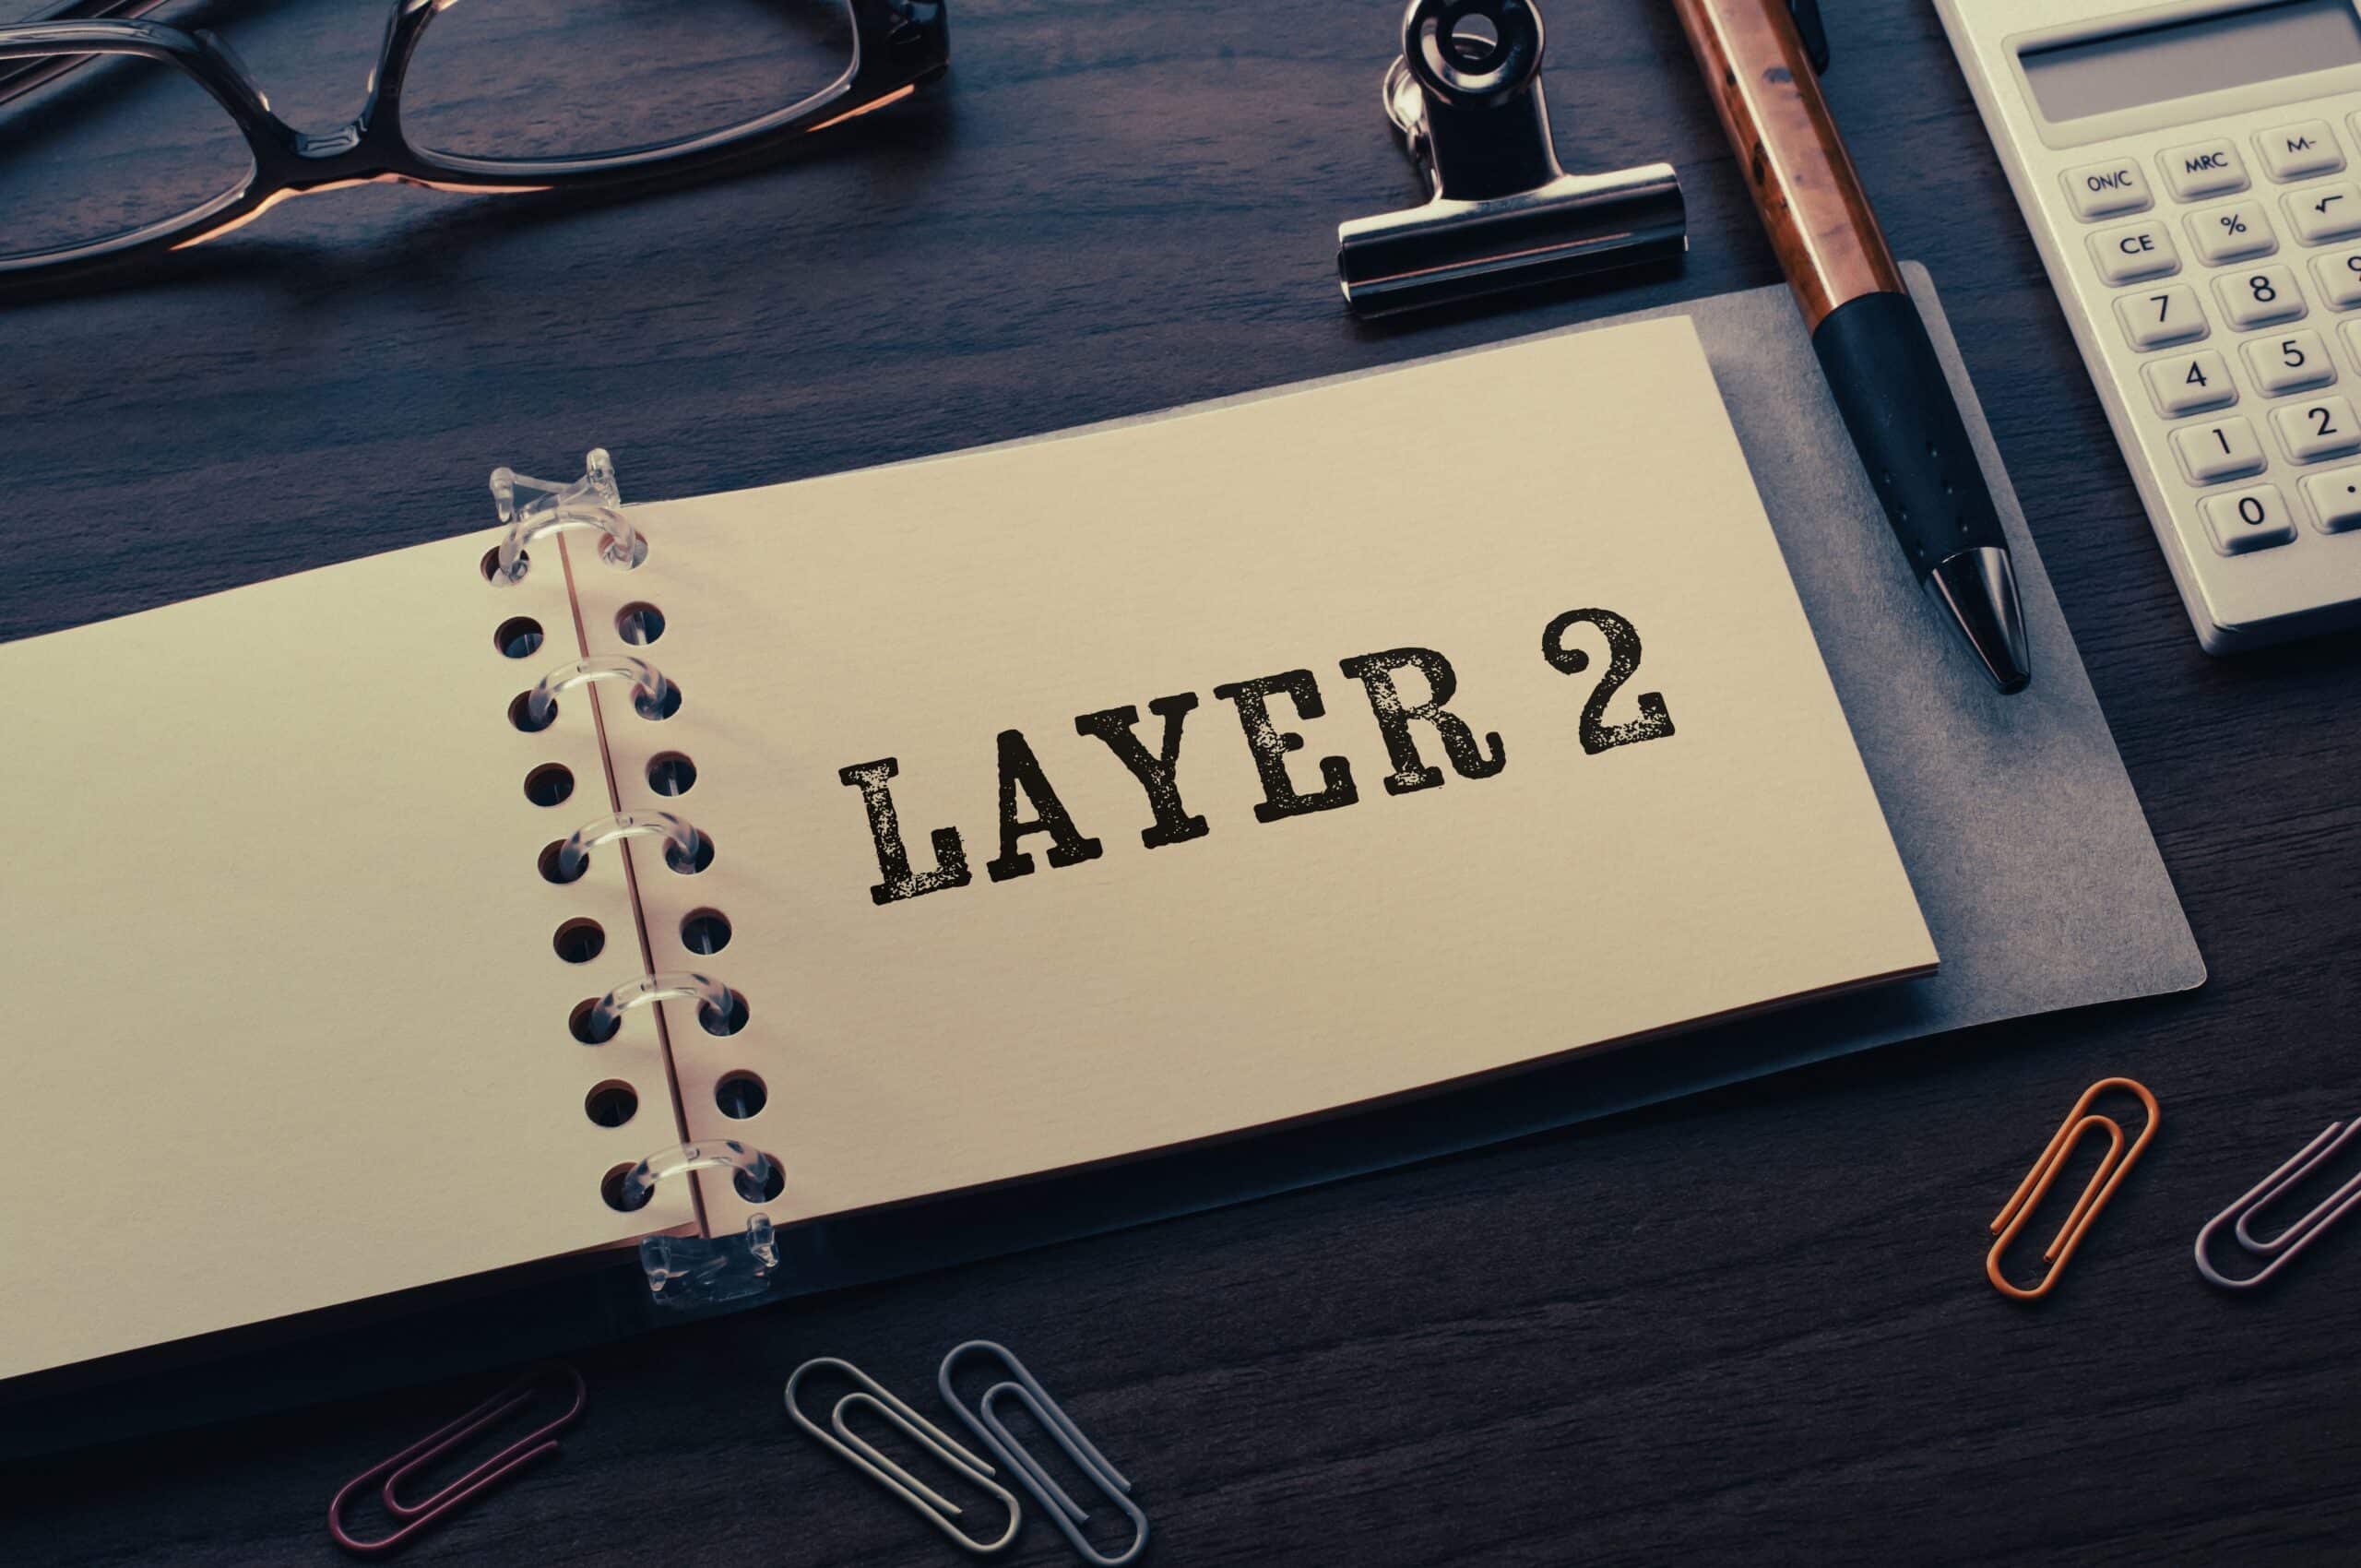 Explore How Merlin Chain Enhances Bitcoin With Layer 2 Tech